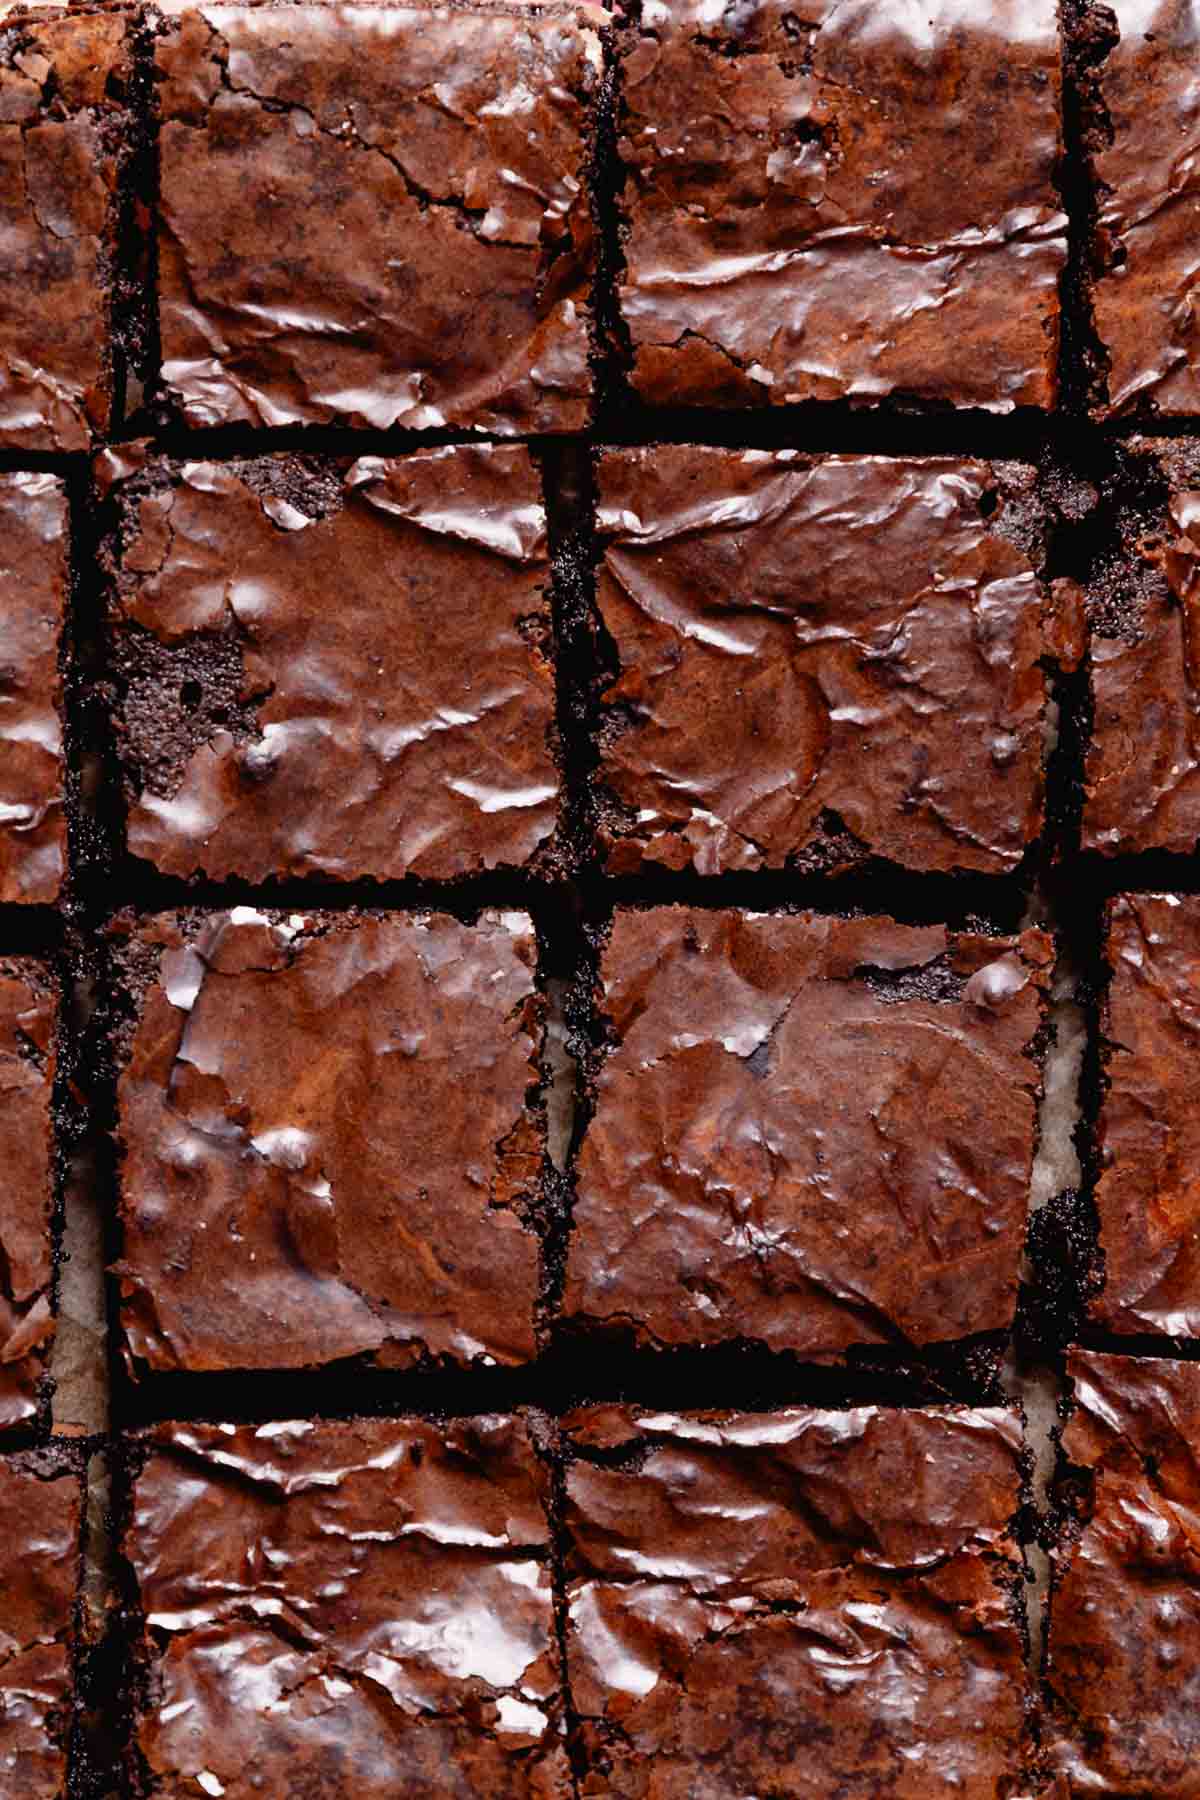 Black cocoa brownies cut into squares.